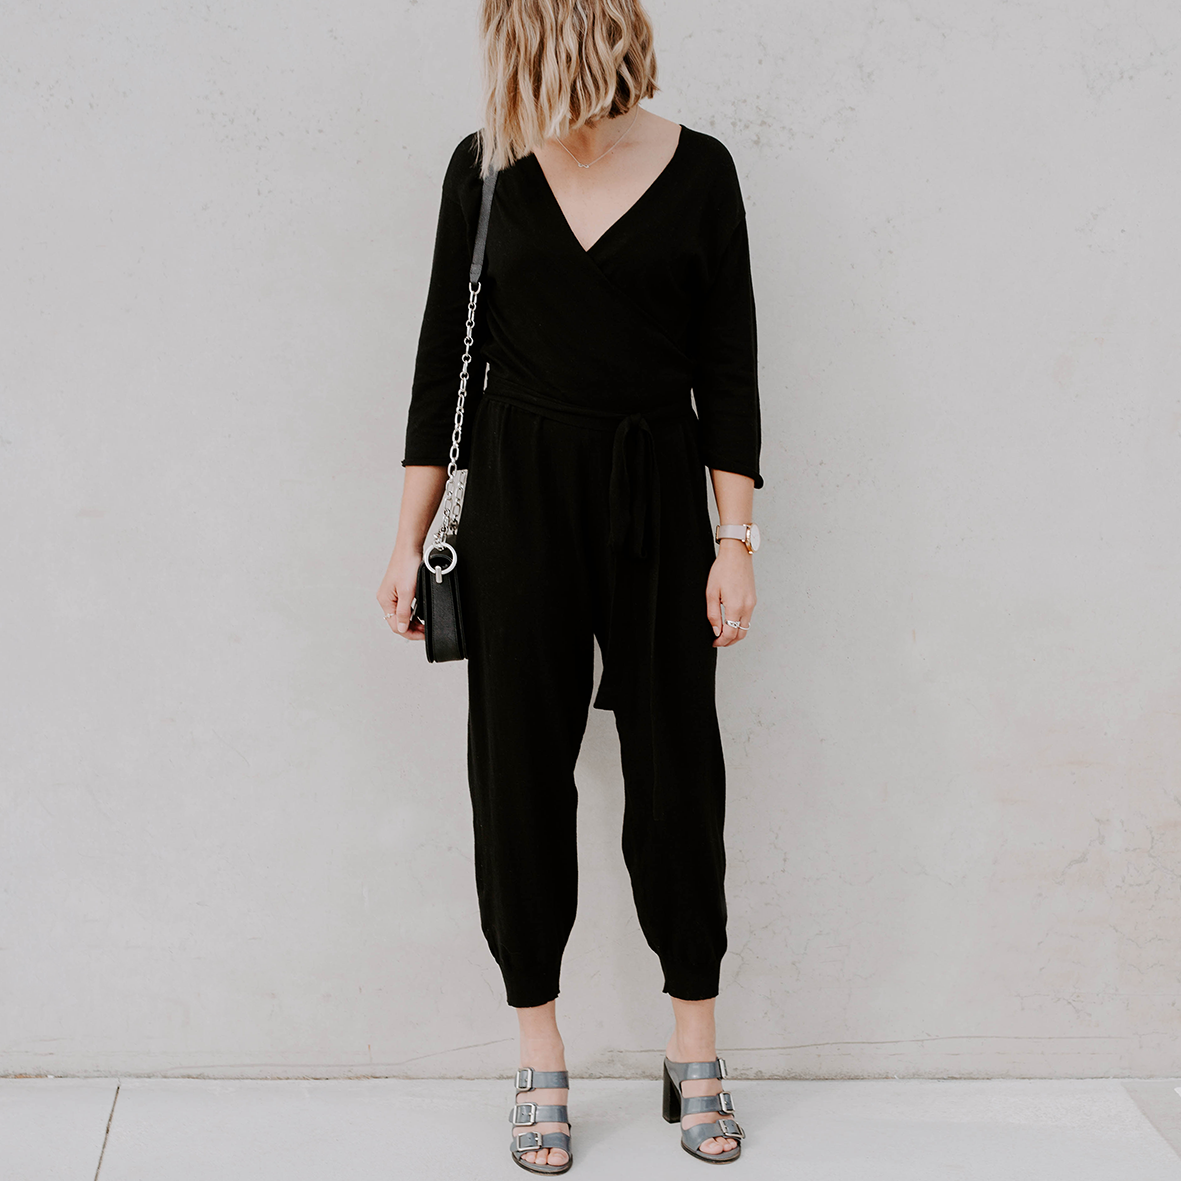 HOW TO TAKE OUR WRAP KNIT JUMPSUIT FROM DAY TO NIGHT